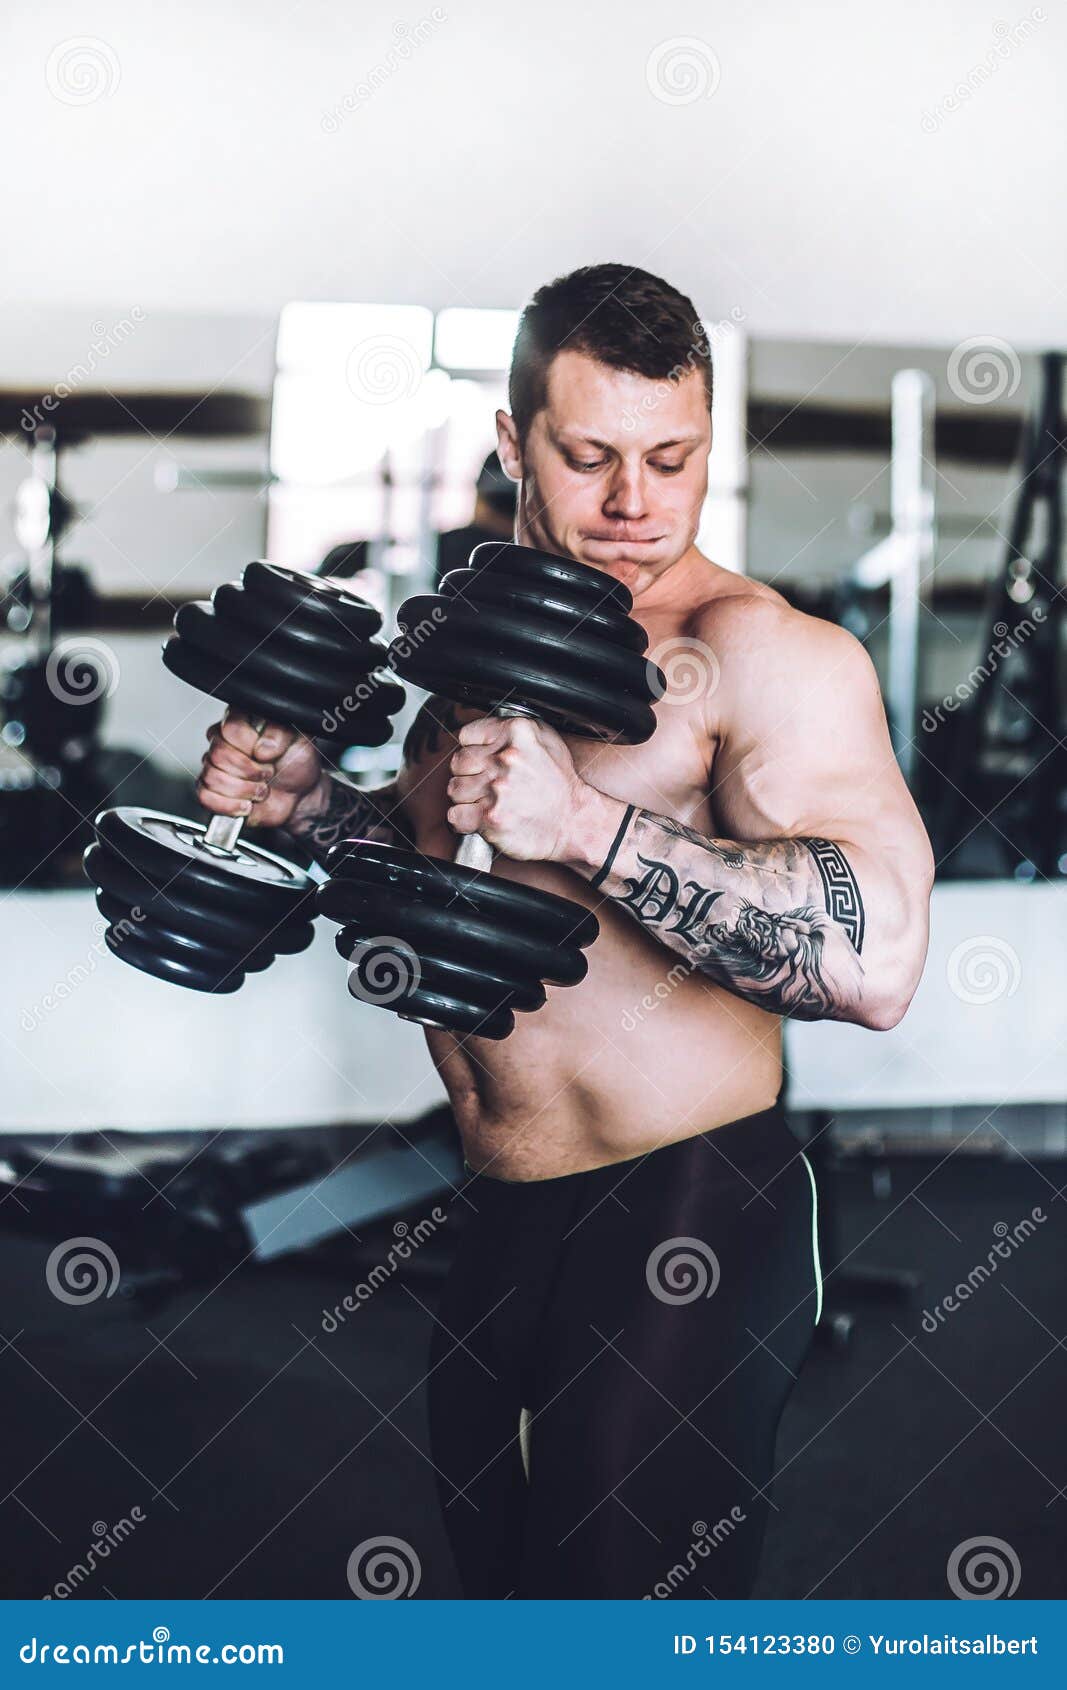 Bodybuilding Coach on Strength Training in the Fitness Room Stock Photo